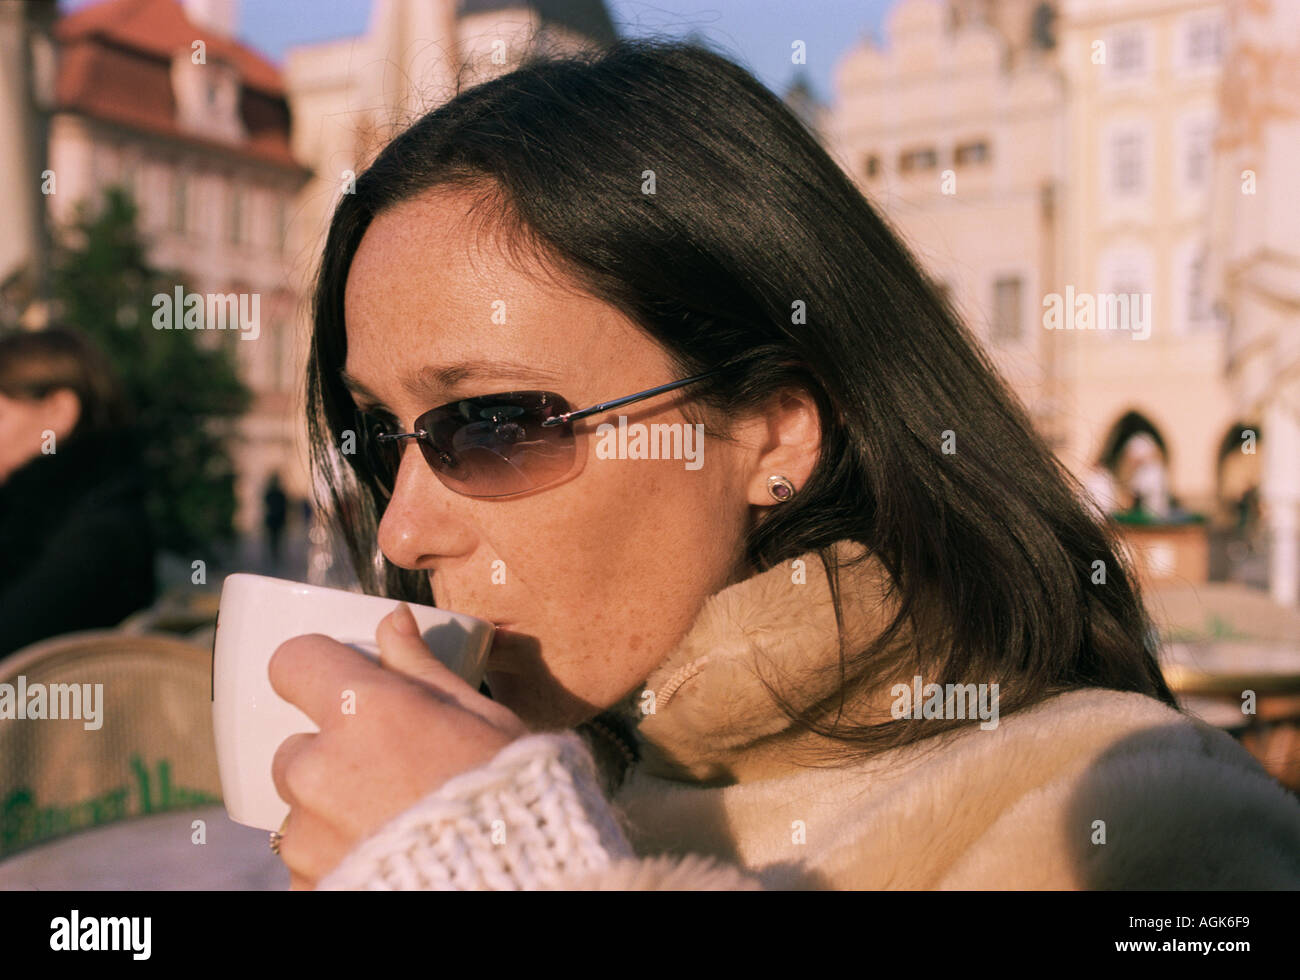 Entspannung in Prag mit cappuccino Stockfoto